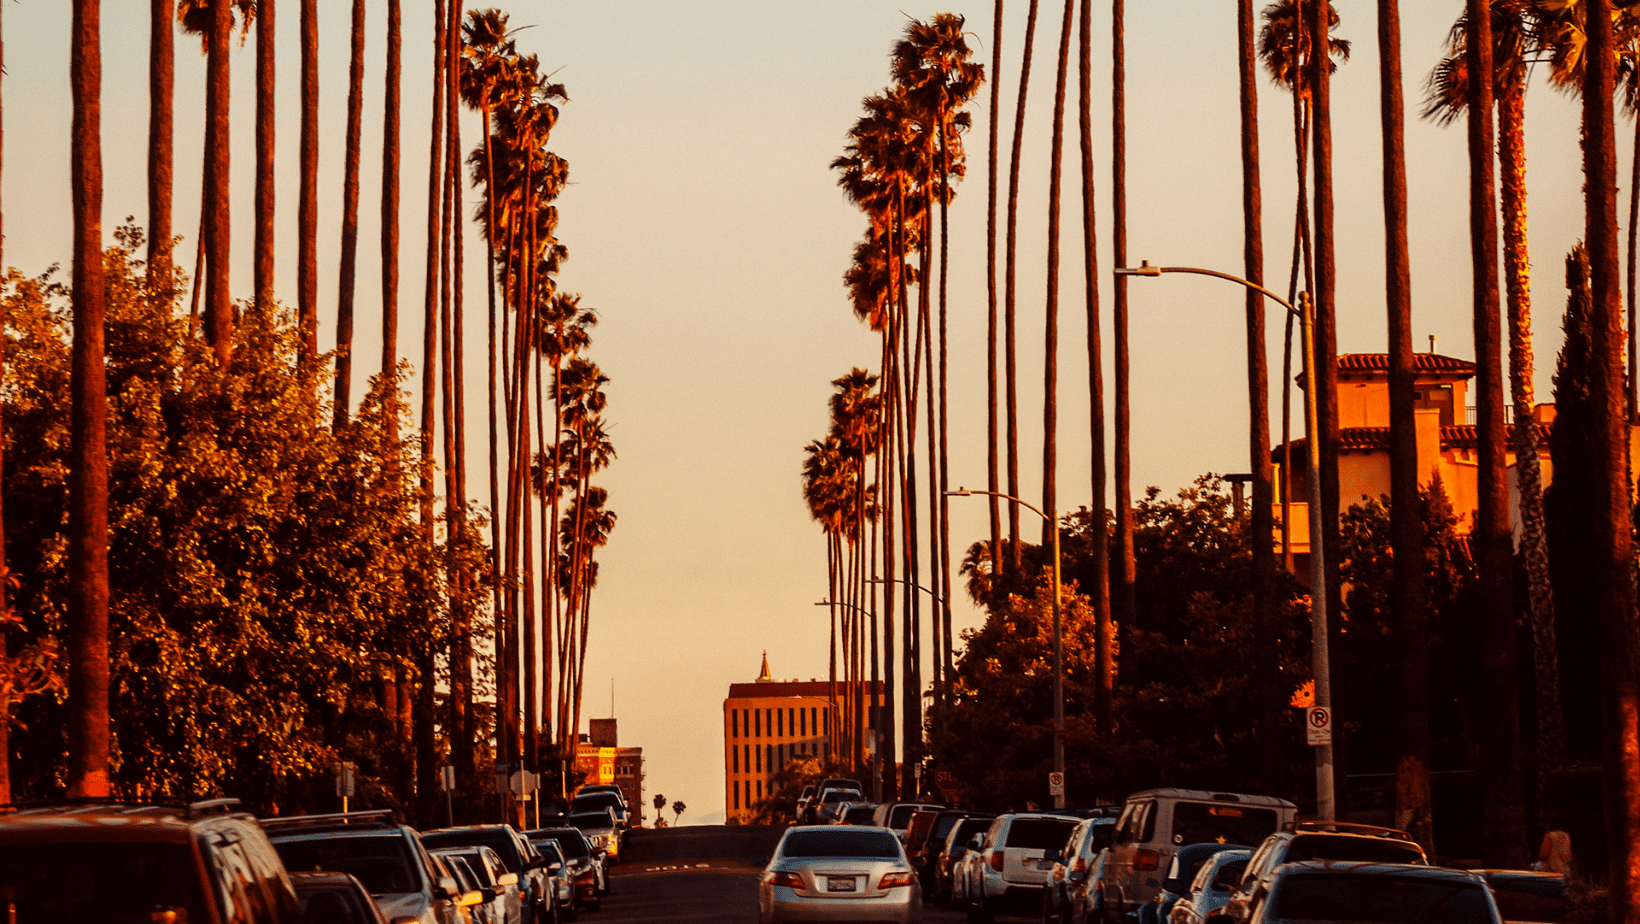 Palm trees line the street at sunset in los angeles, california.
